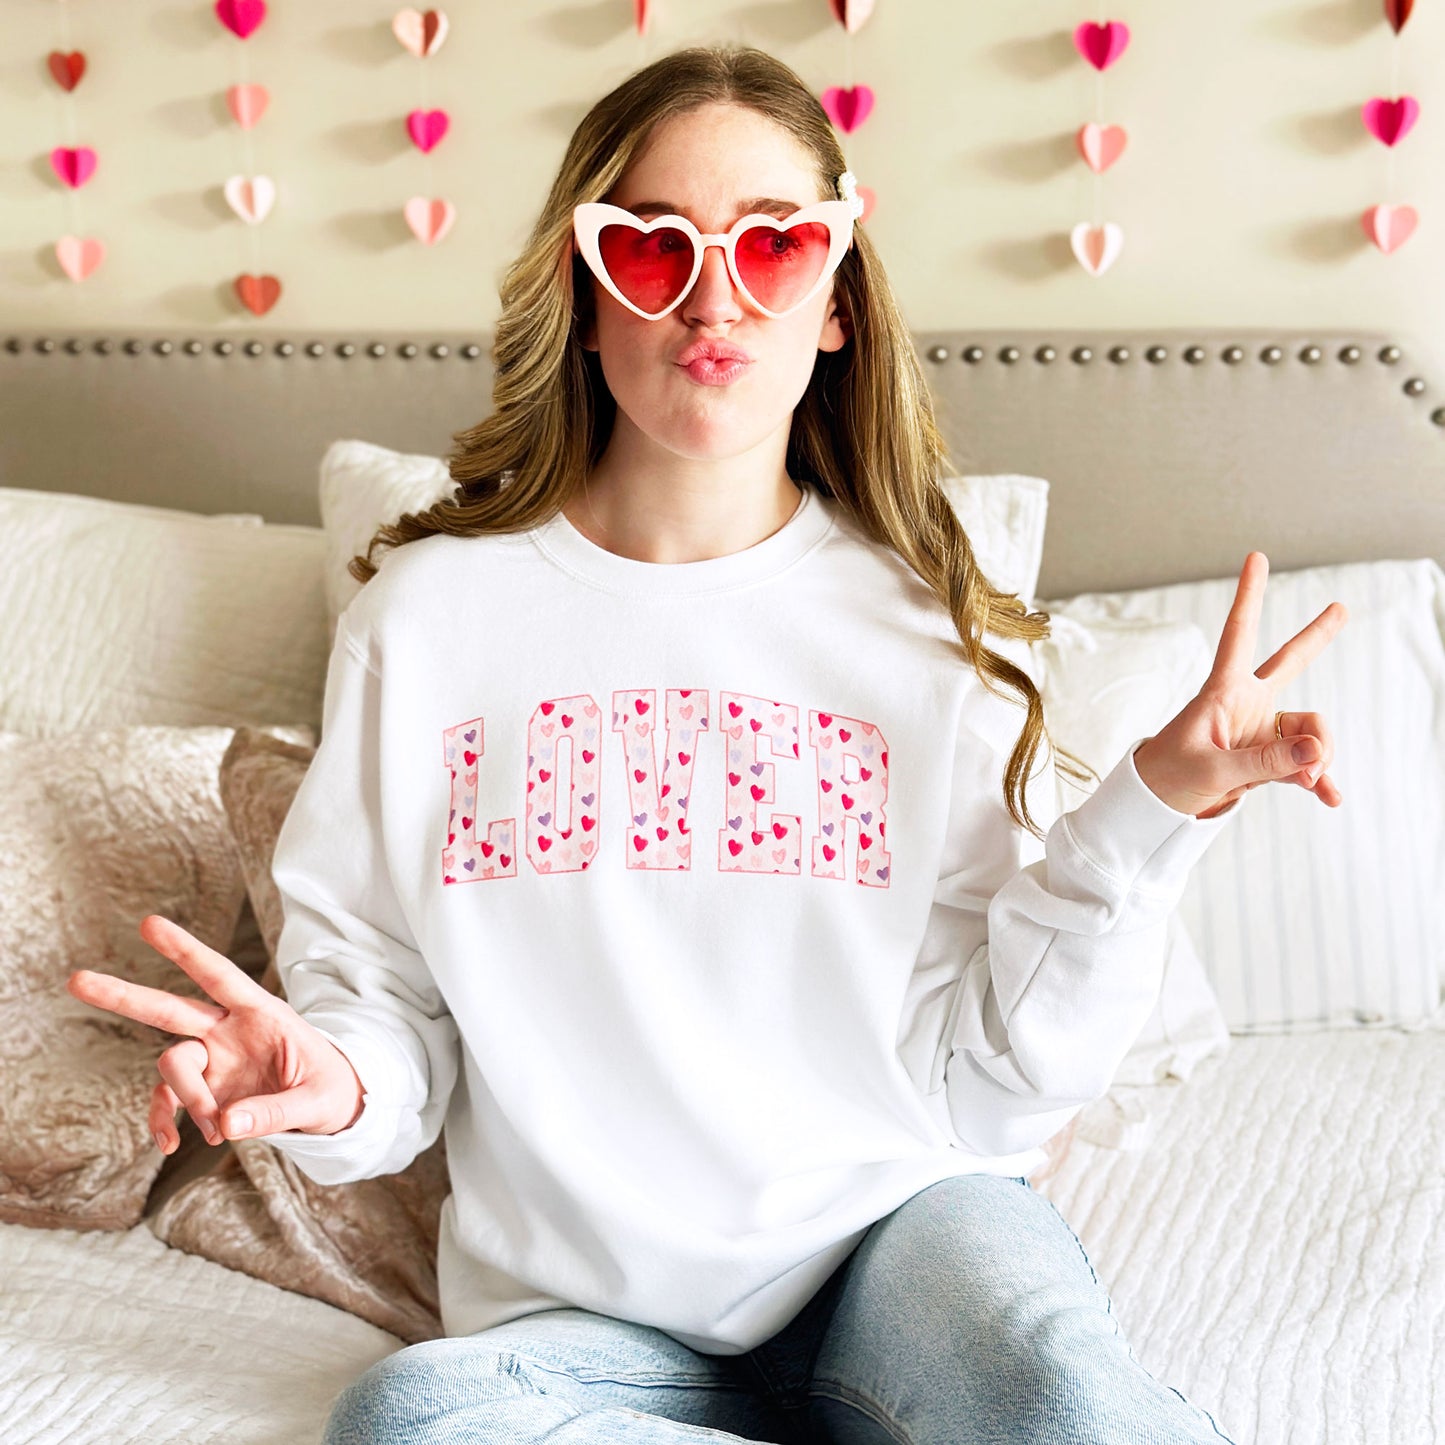 young woman modeling a white crewneck sweatshirt with printed lover design filled with valentine's hearts